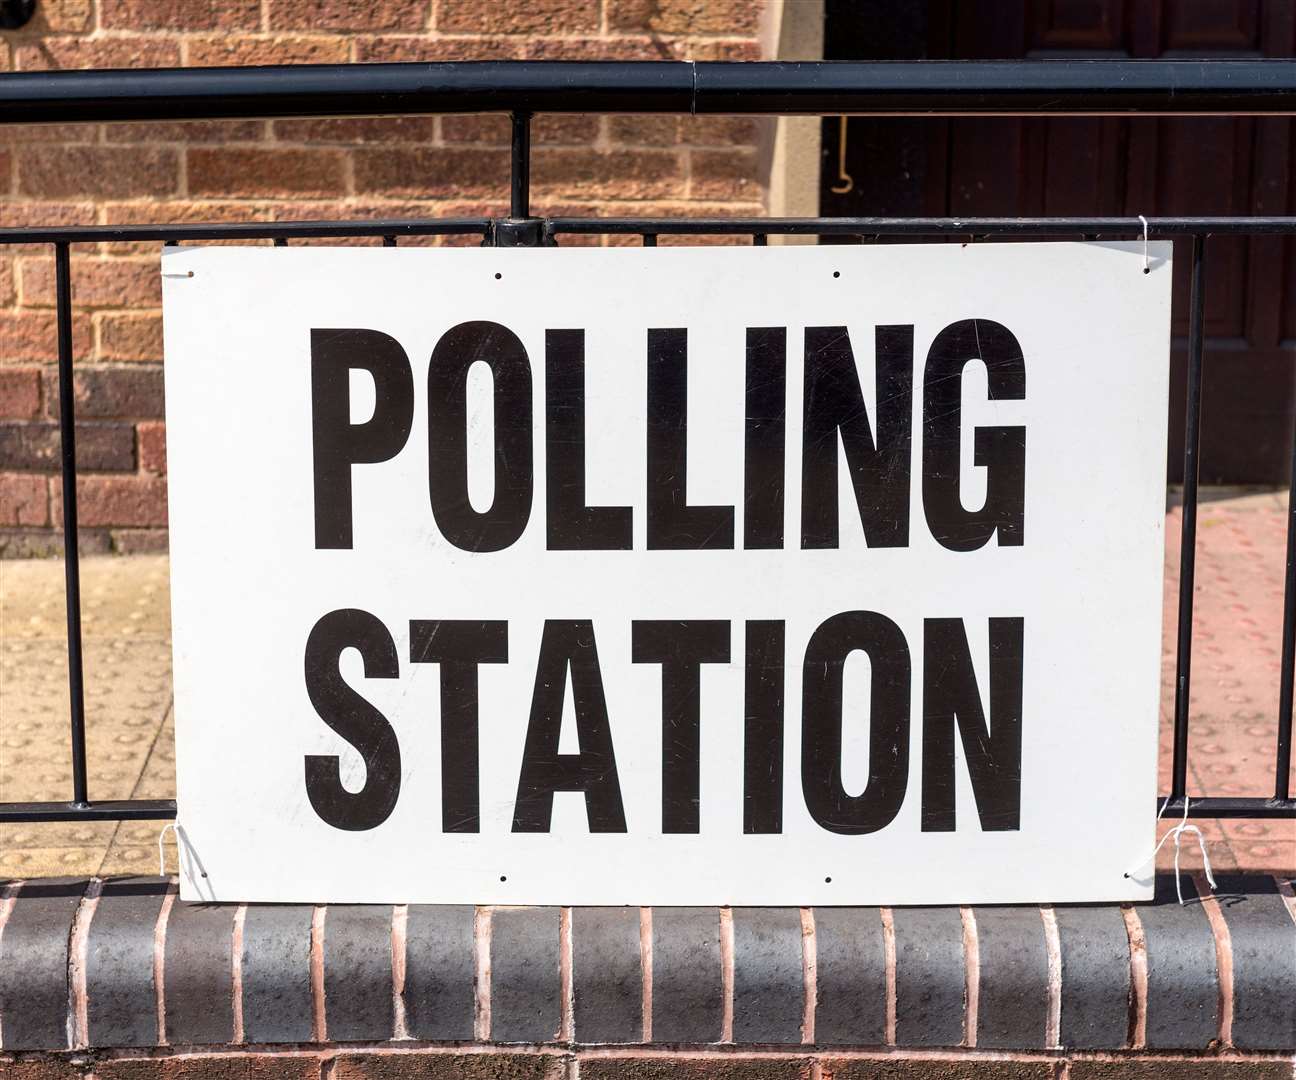 The polling stations are open now